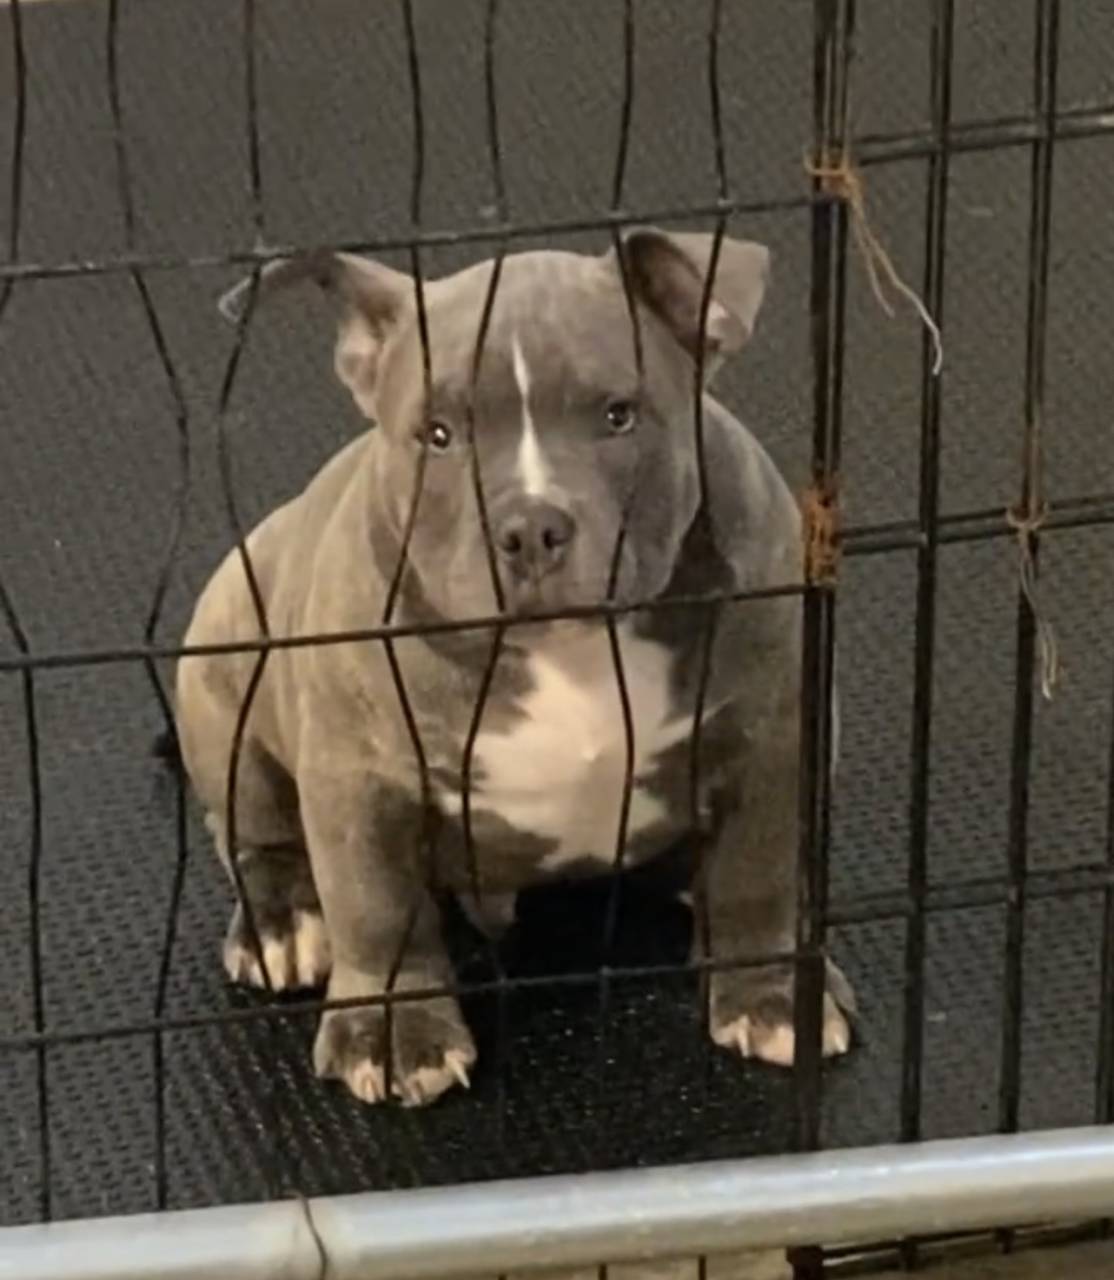 American Bully named Pablo